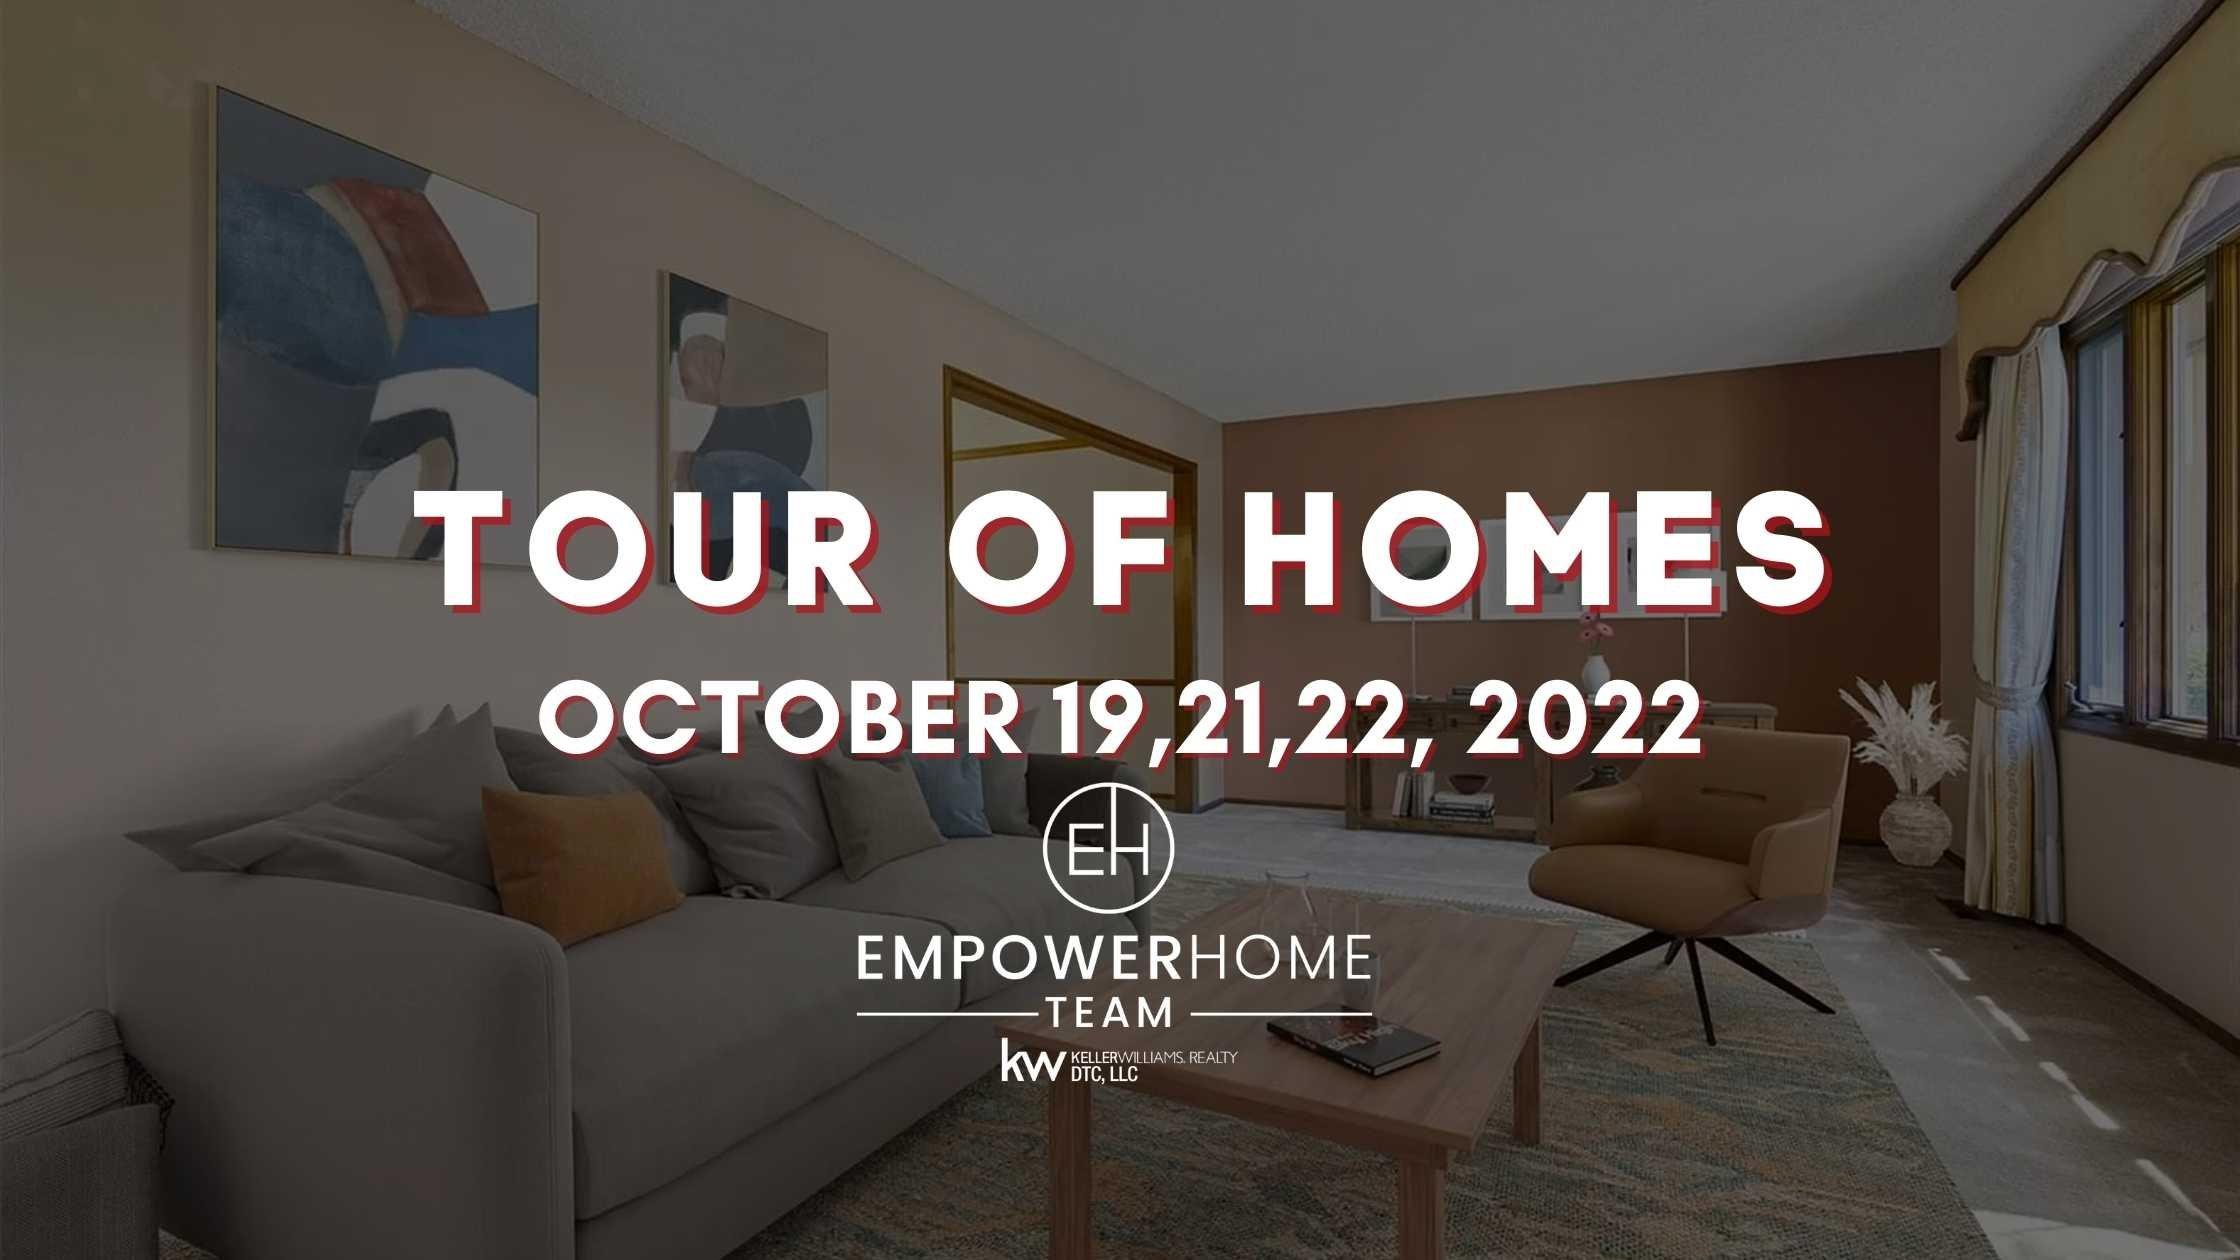 Denver Tour of Homes In-Person October 19,21,22